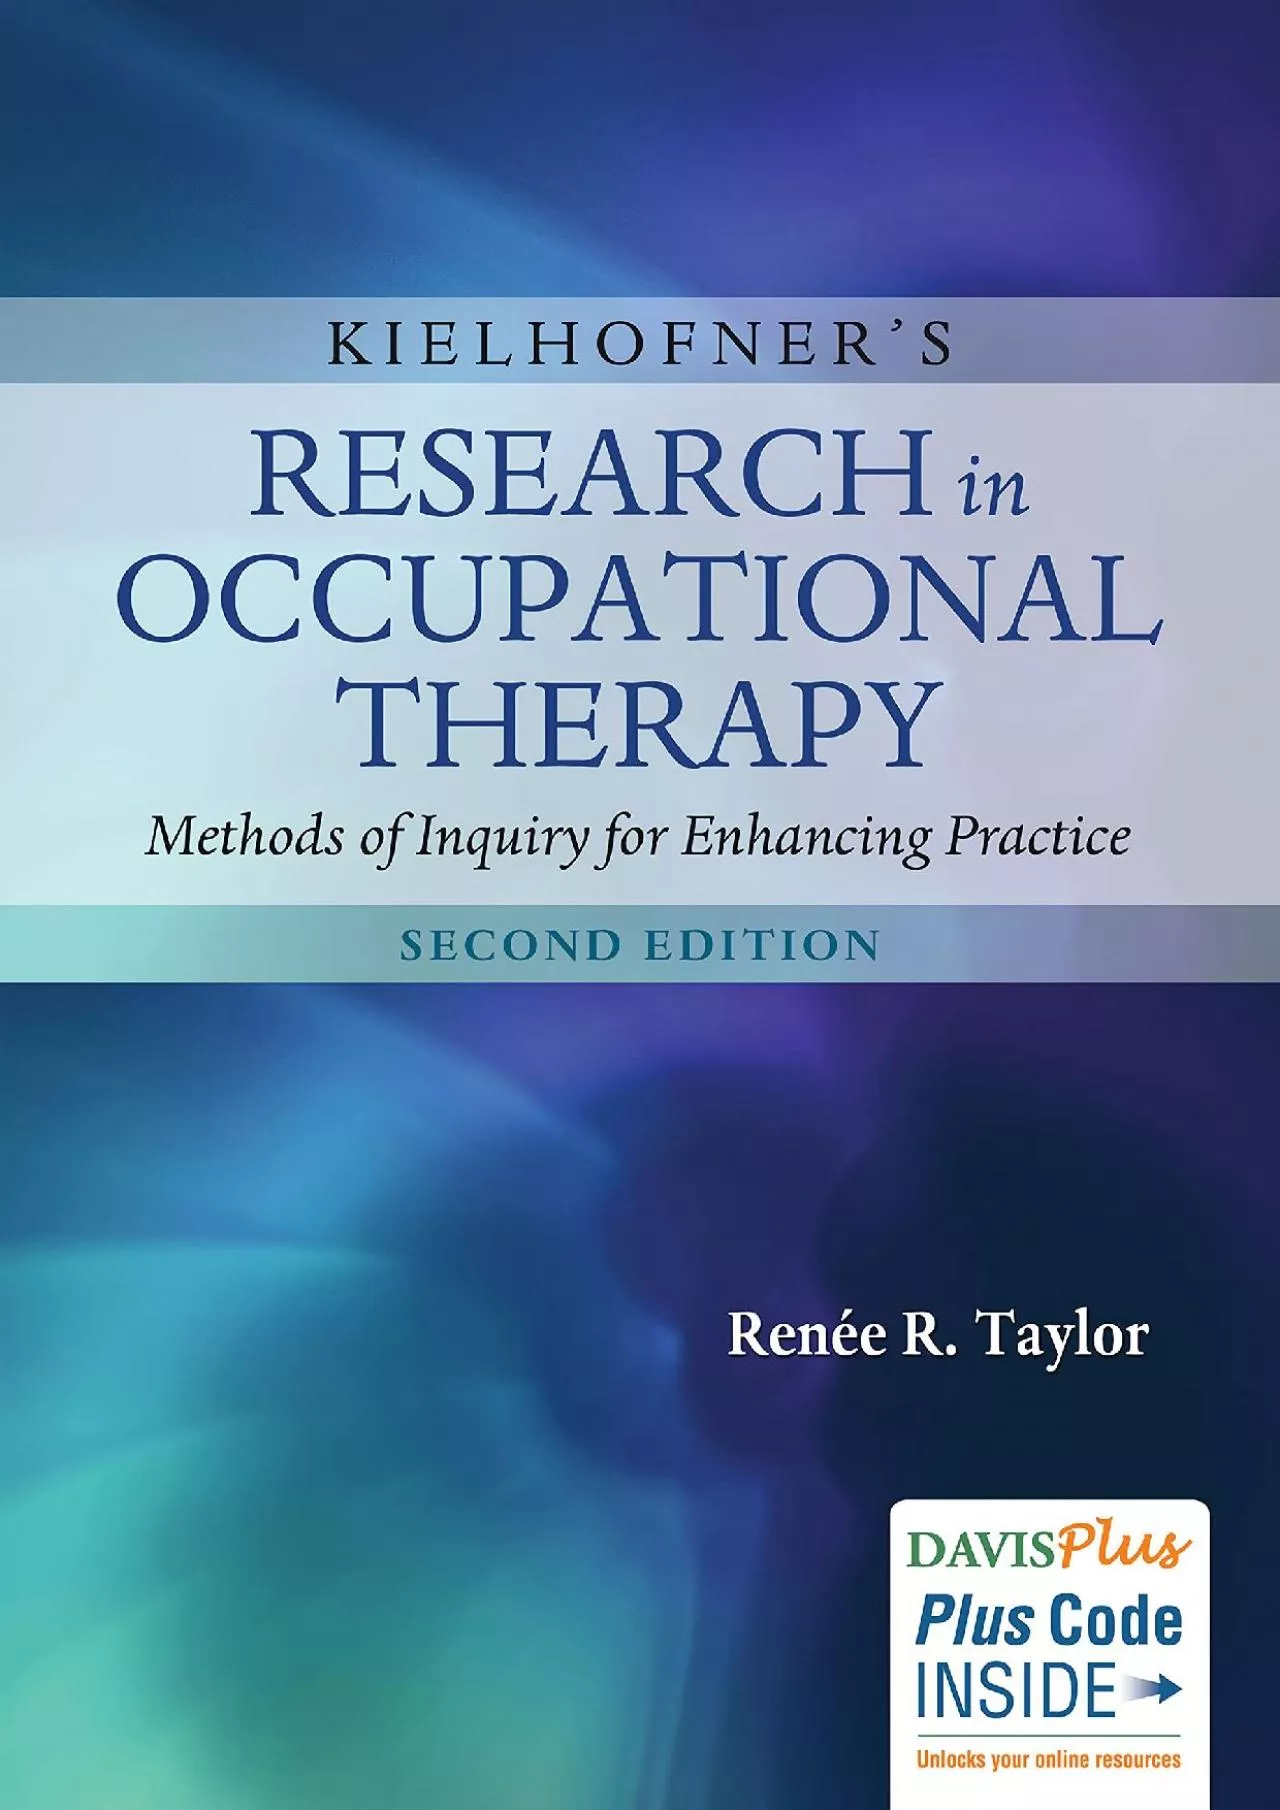 (DOWNLOAD)-Kielhofner\'s Research in Occupational Therapy: Methods of Inquiry for Enhancing